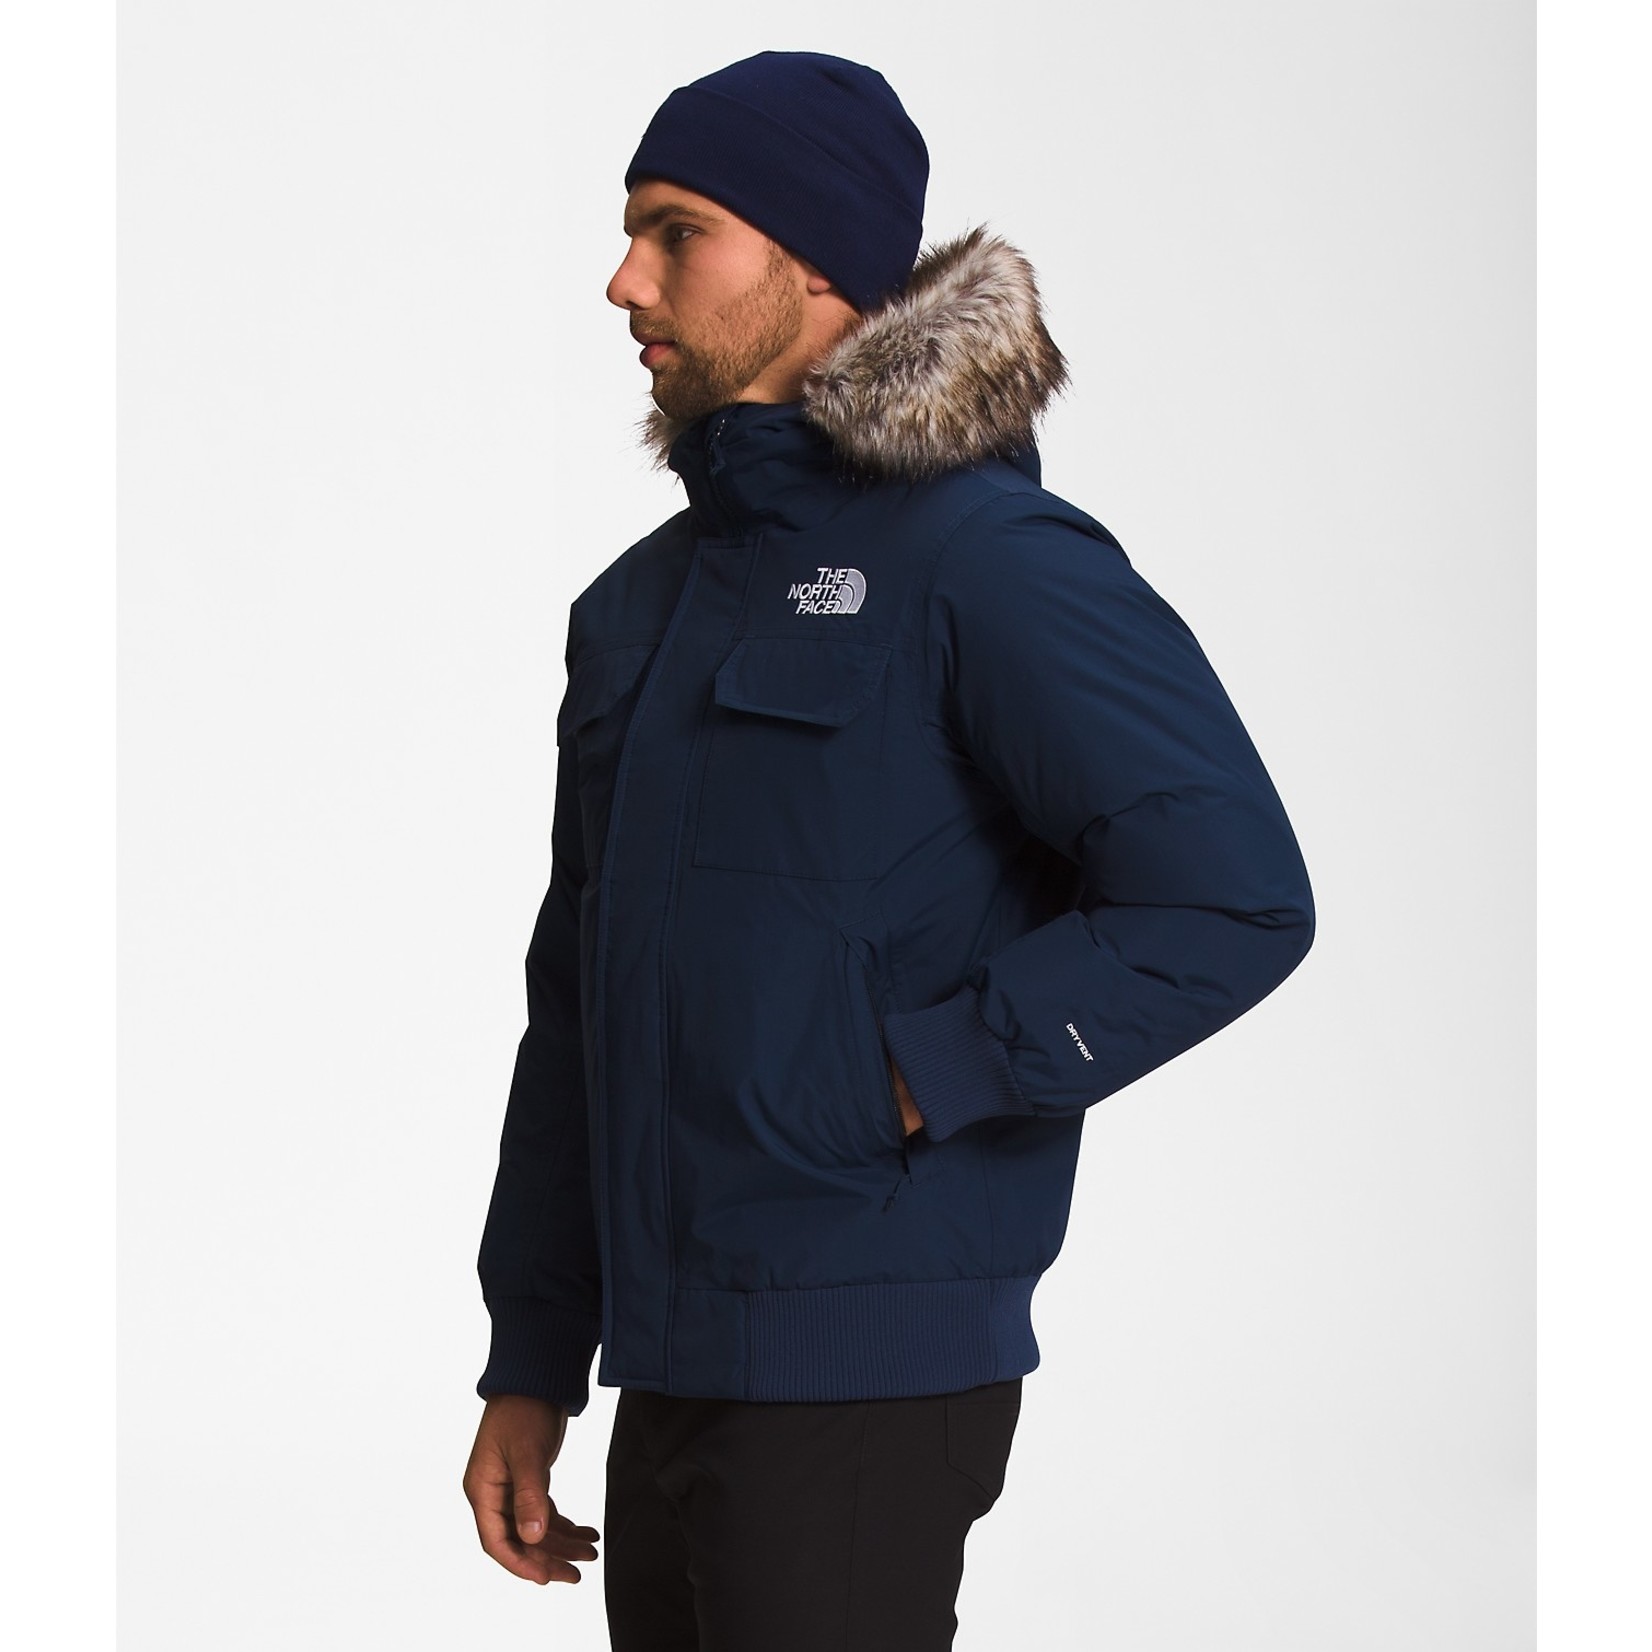 THE NORTH FACE M MCMURDO BOMBER